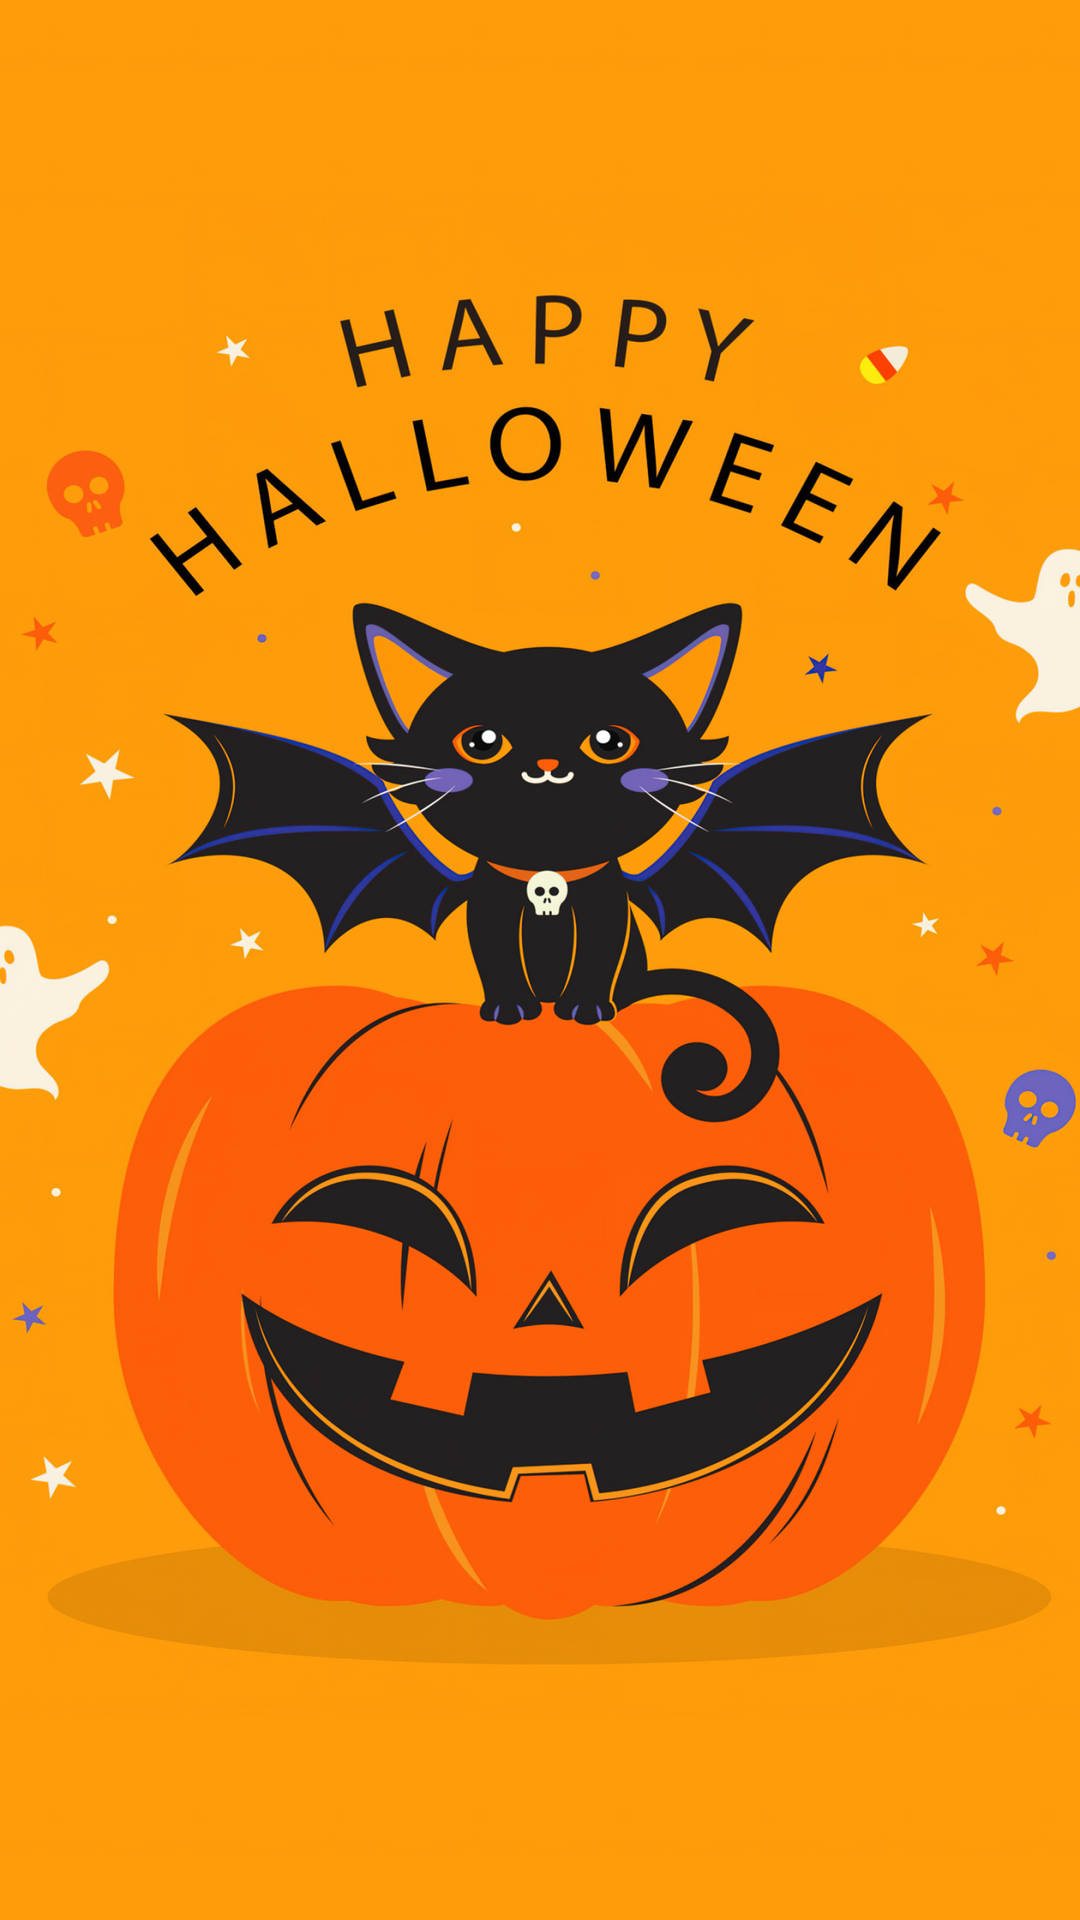 "Celebrate Happy Halloween with a spooky greeting" Wallpaper